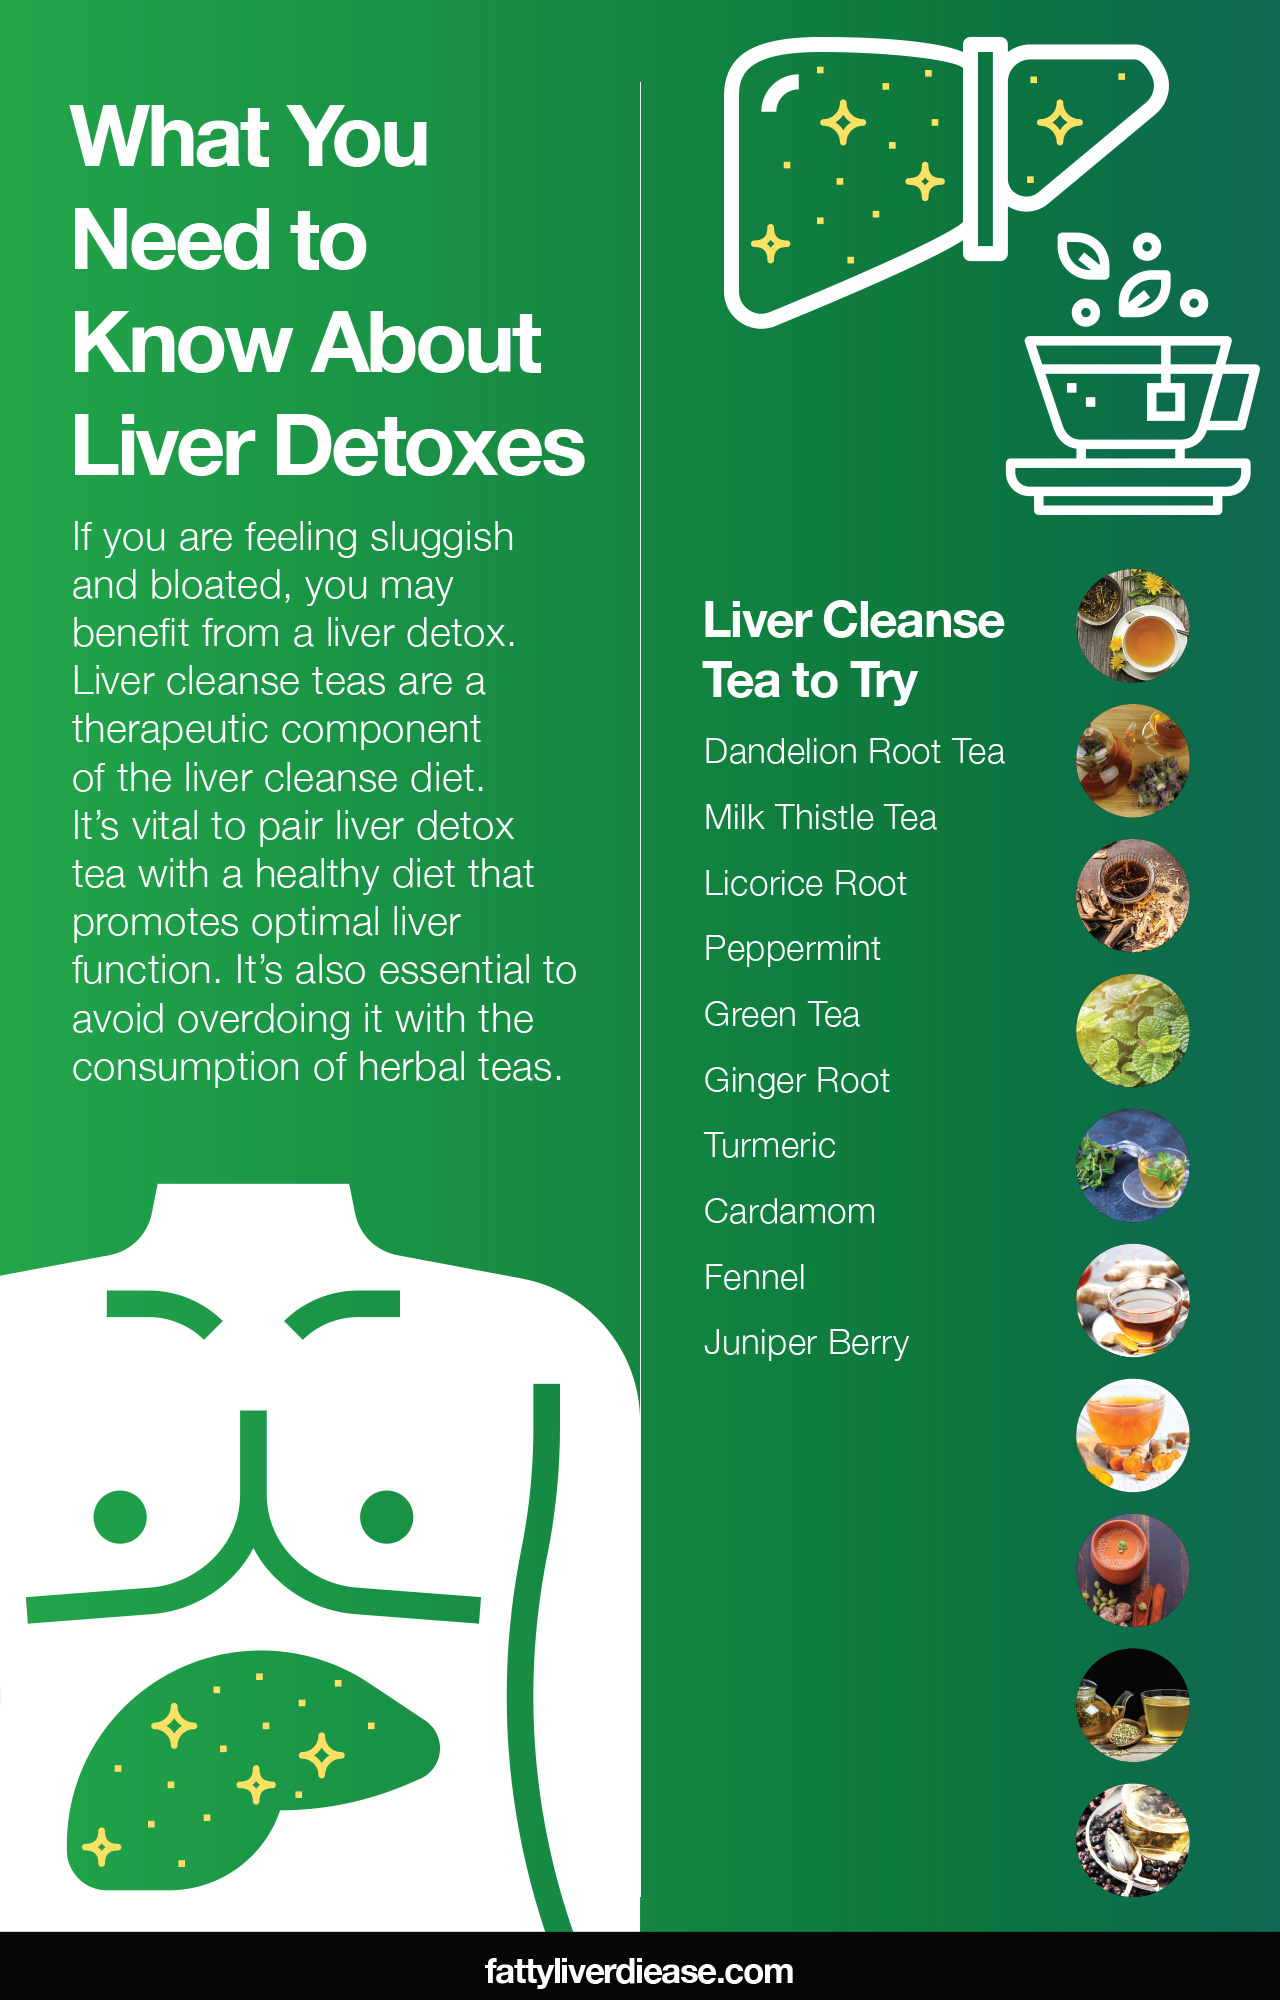 Liver Cleanse Tea to Try